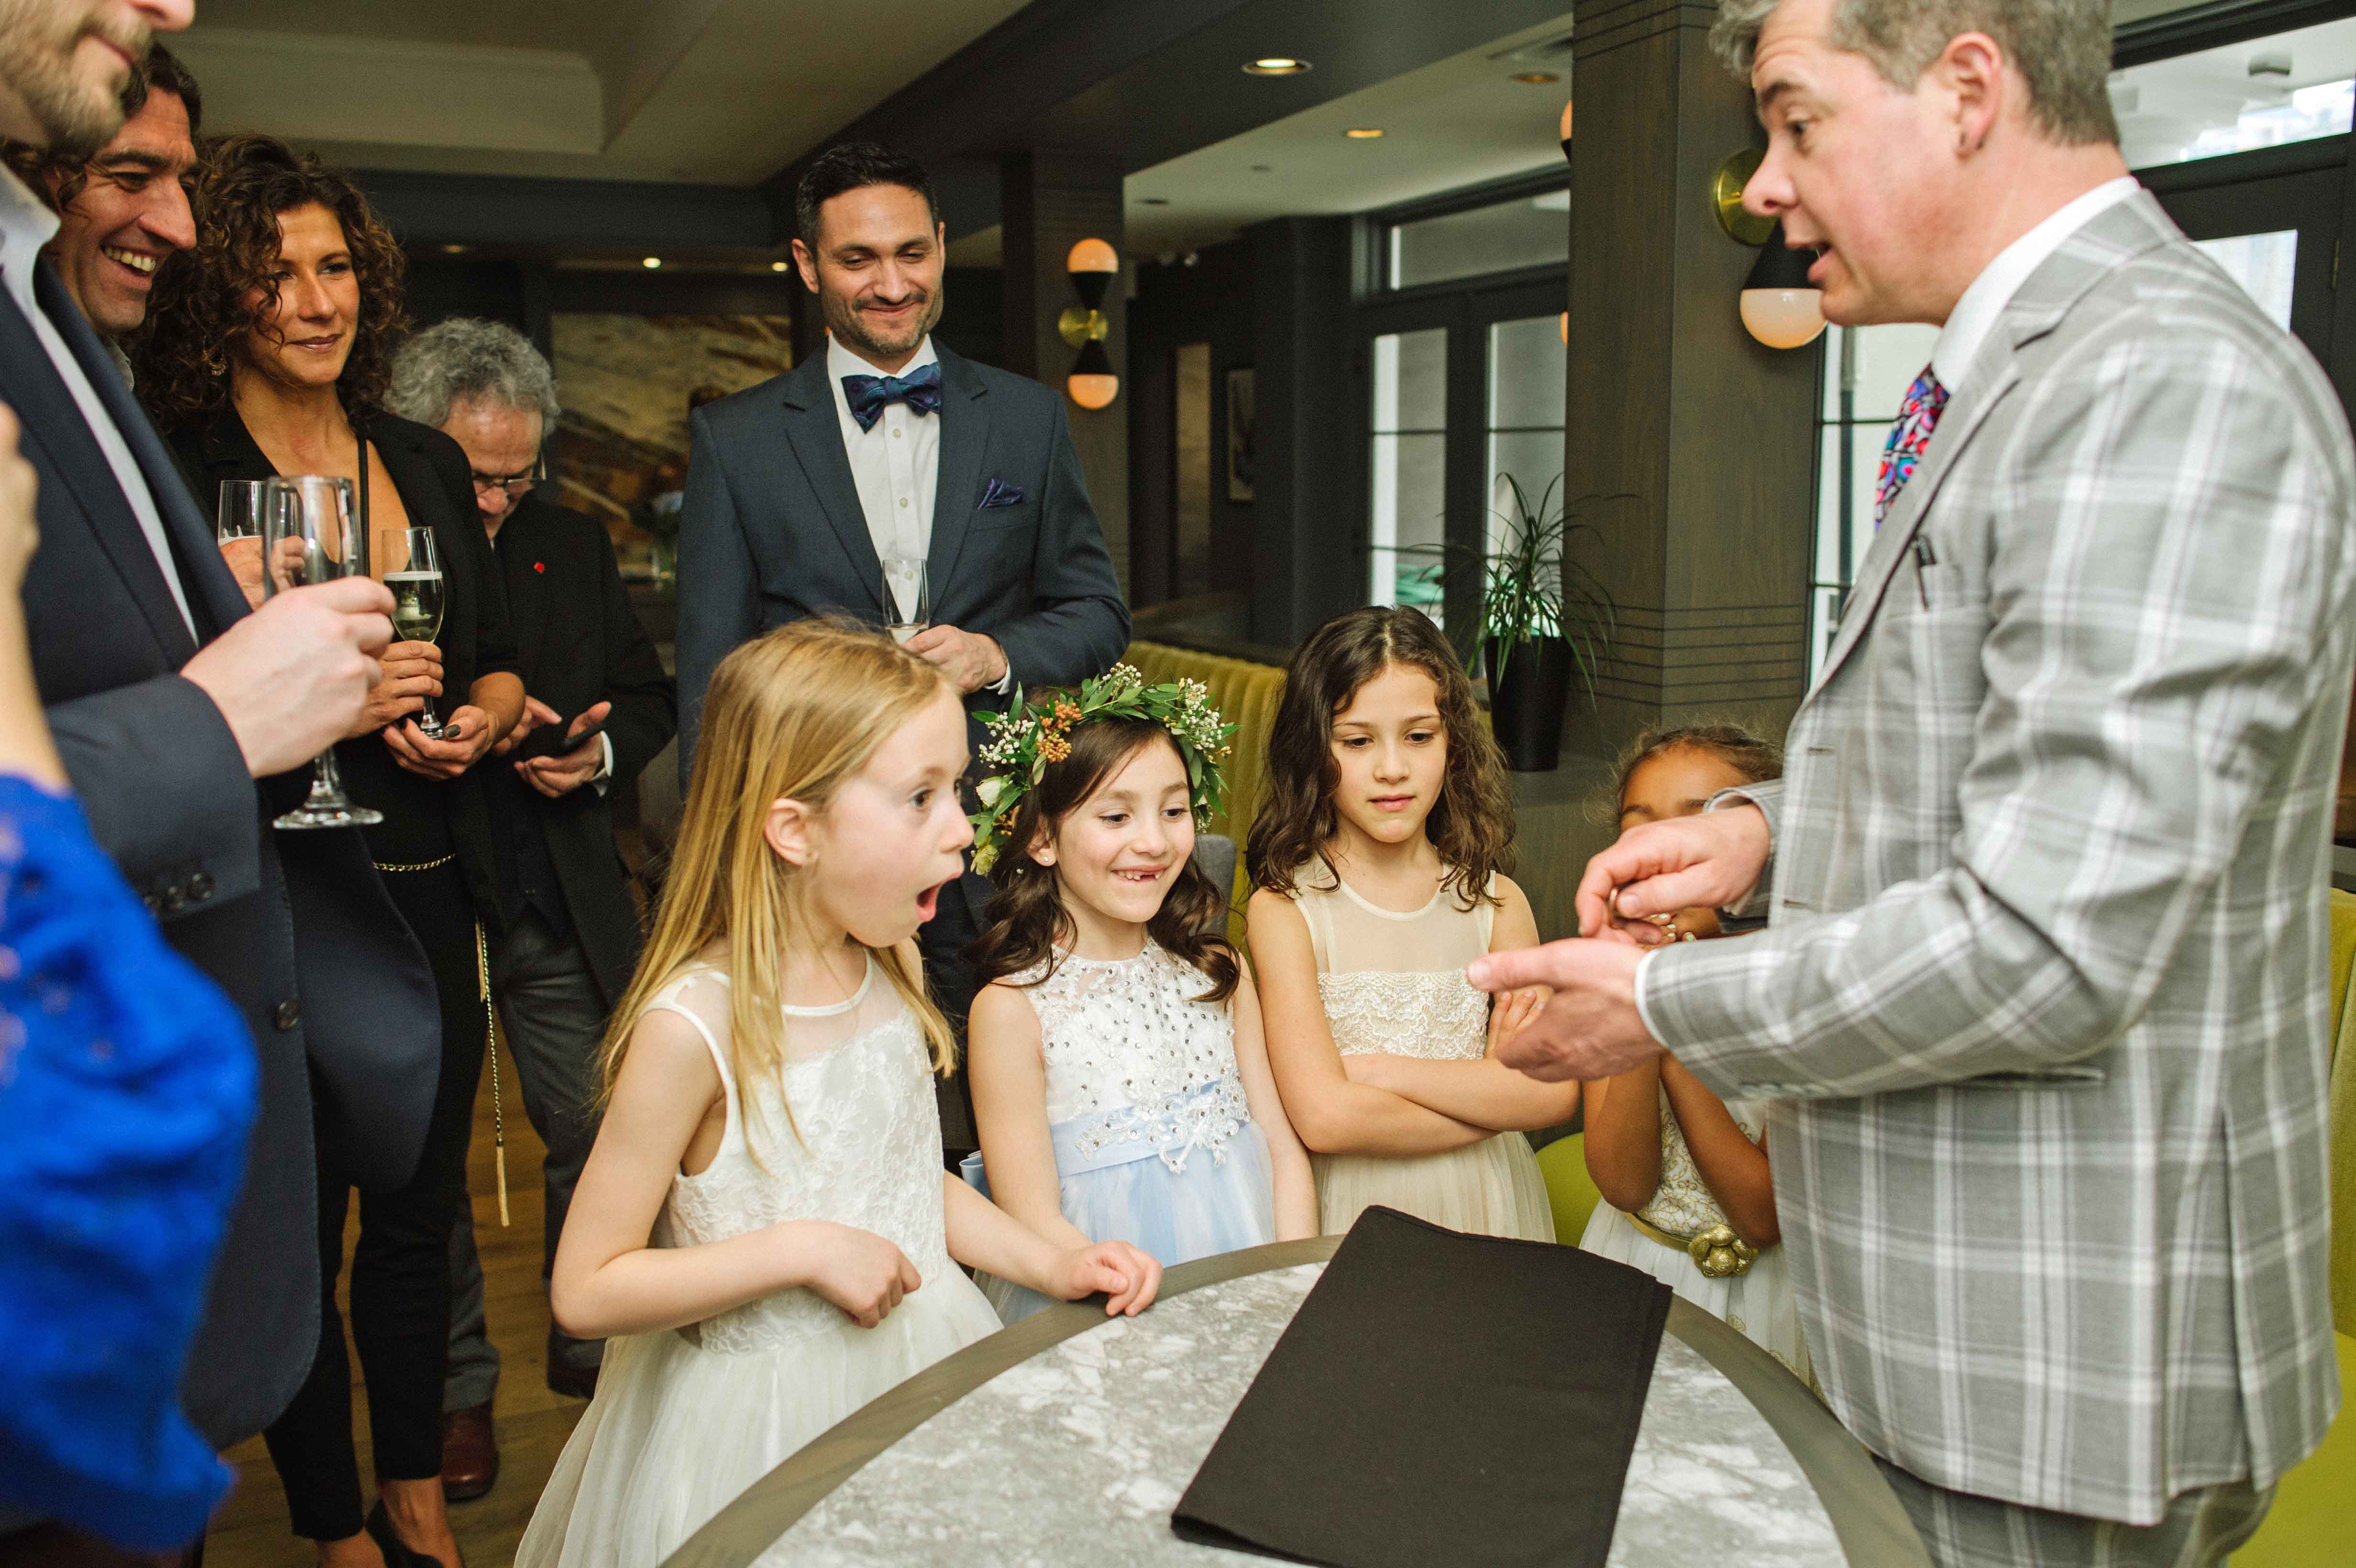 Malcolm performing card trick for flower girls